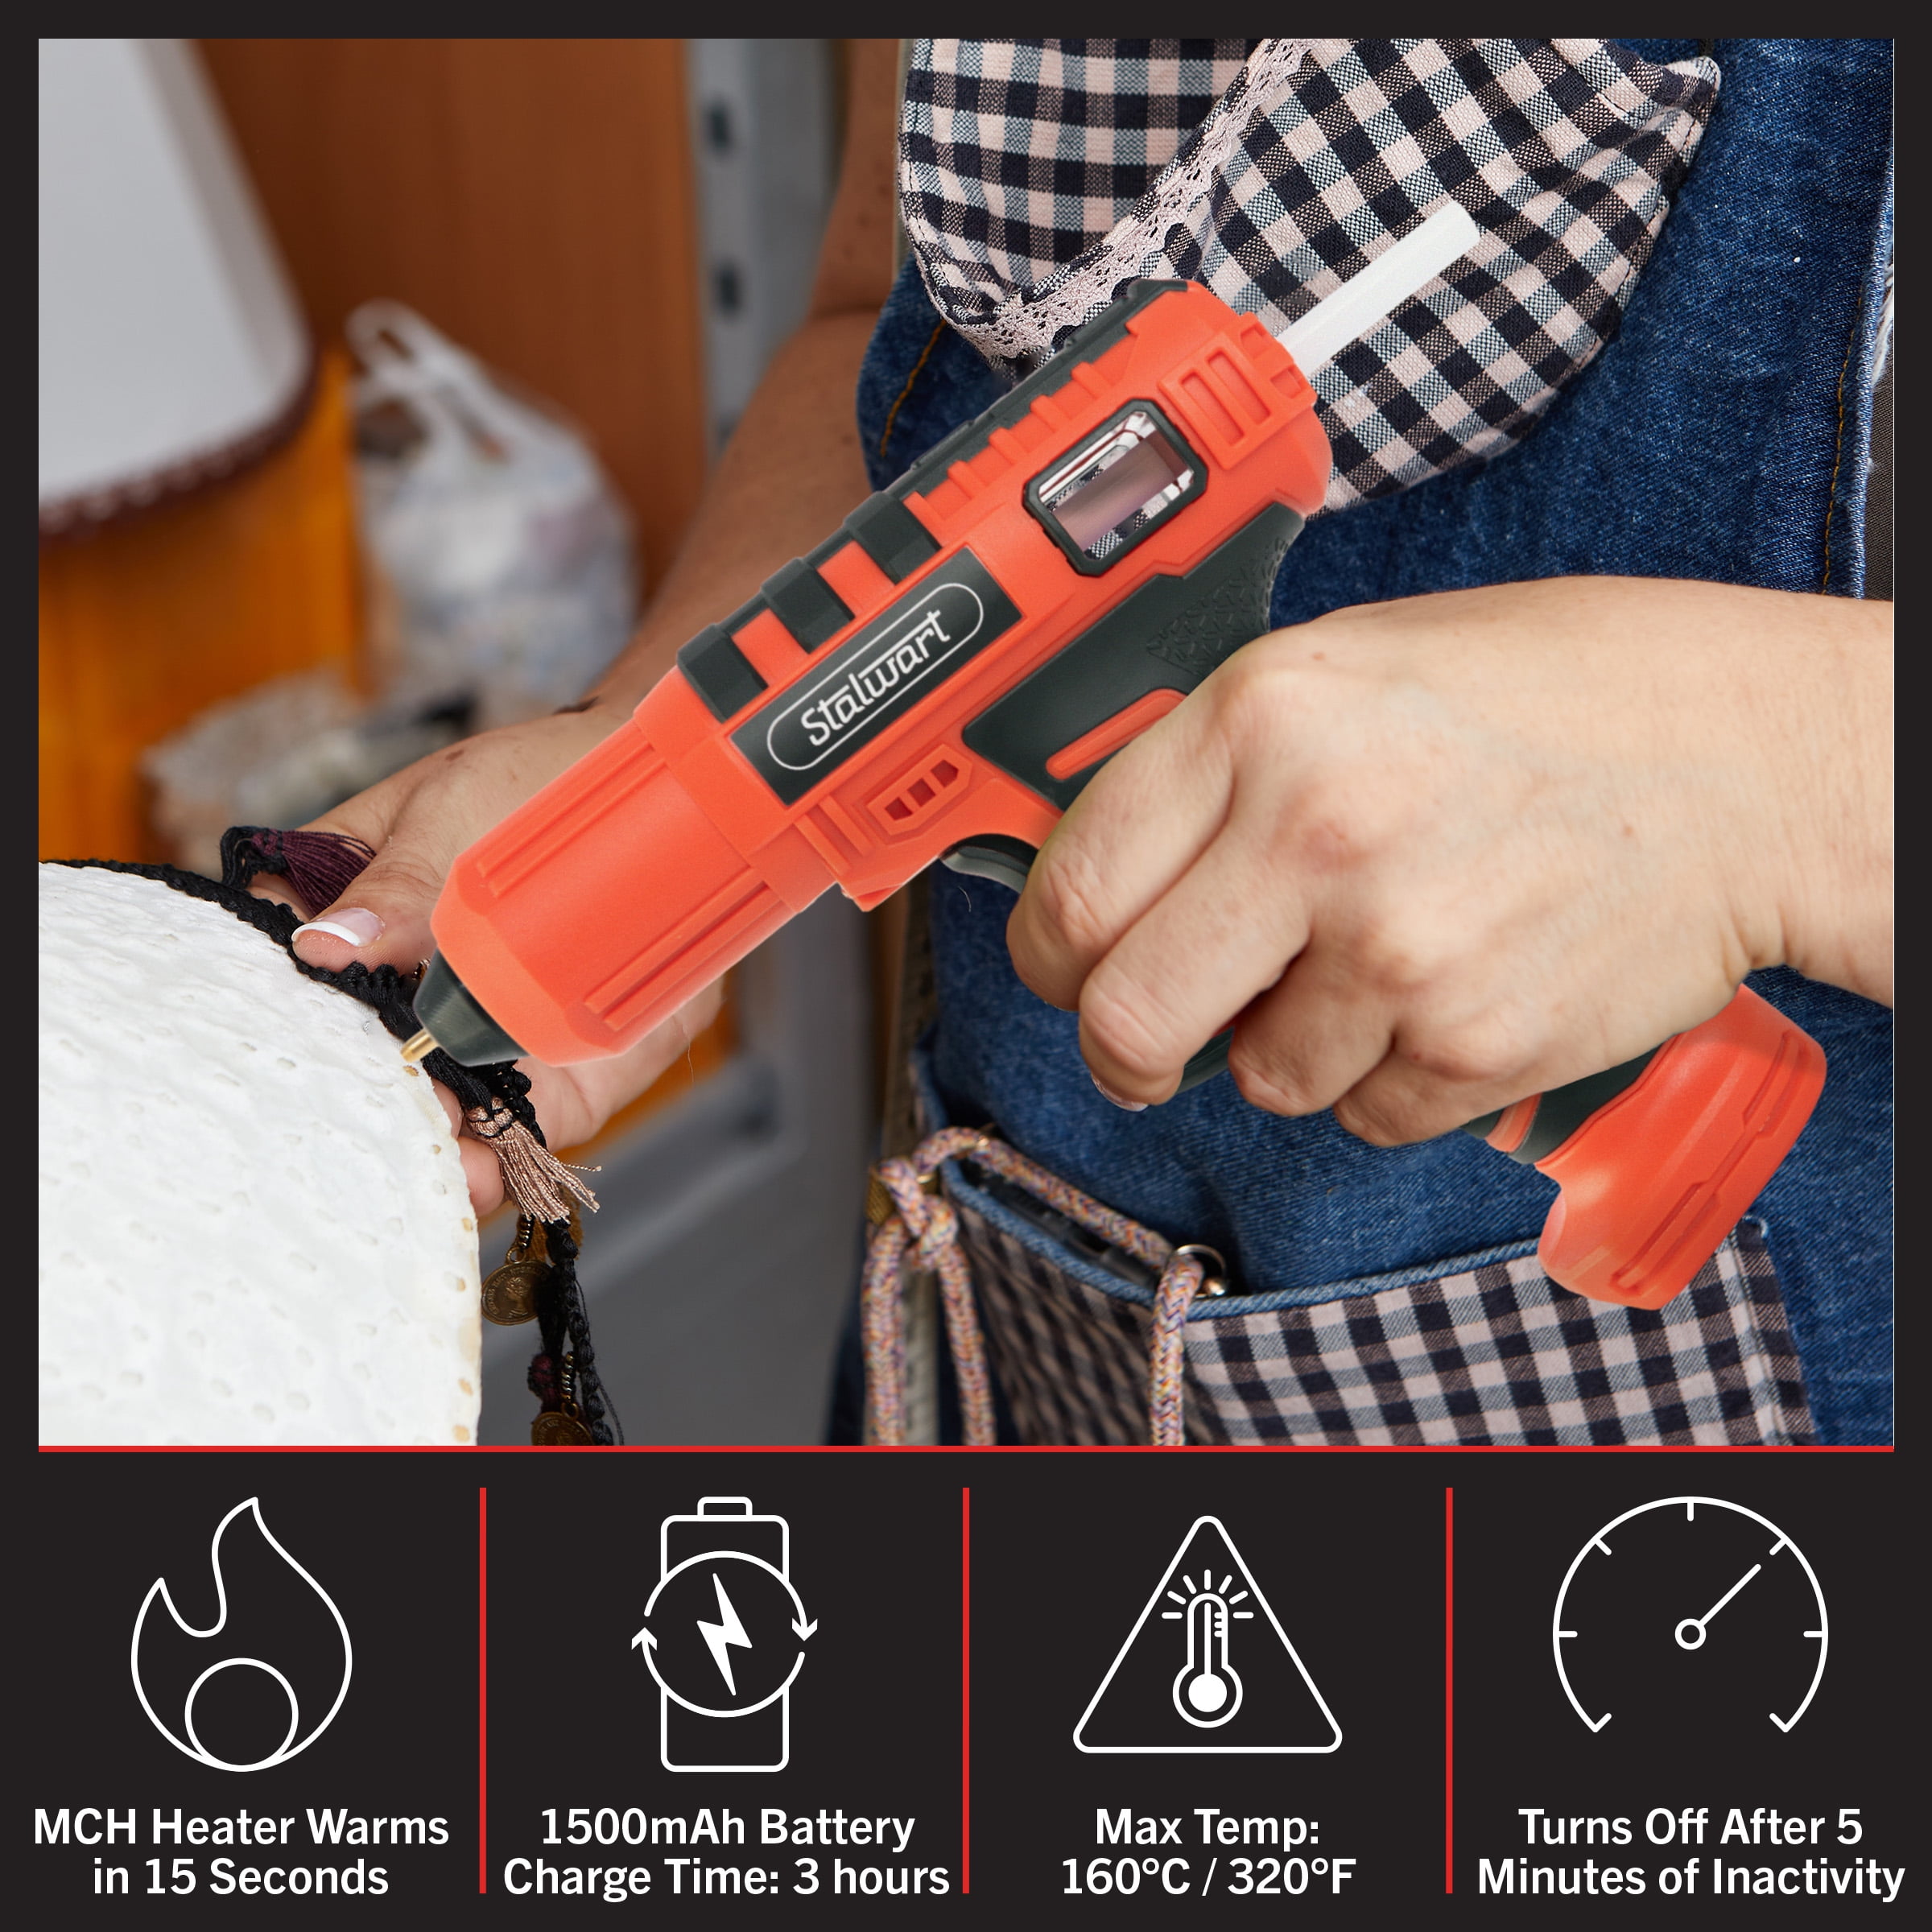 4V Cordless Hot Glue Gun - Wireless Glue Gun Kit with 15 Second Warm-Up  Time and 20 Glue Sticks - Crafting and Classroom Essentials by Stalwart  (Red)